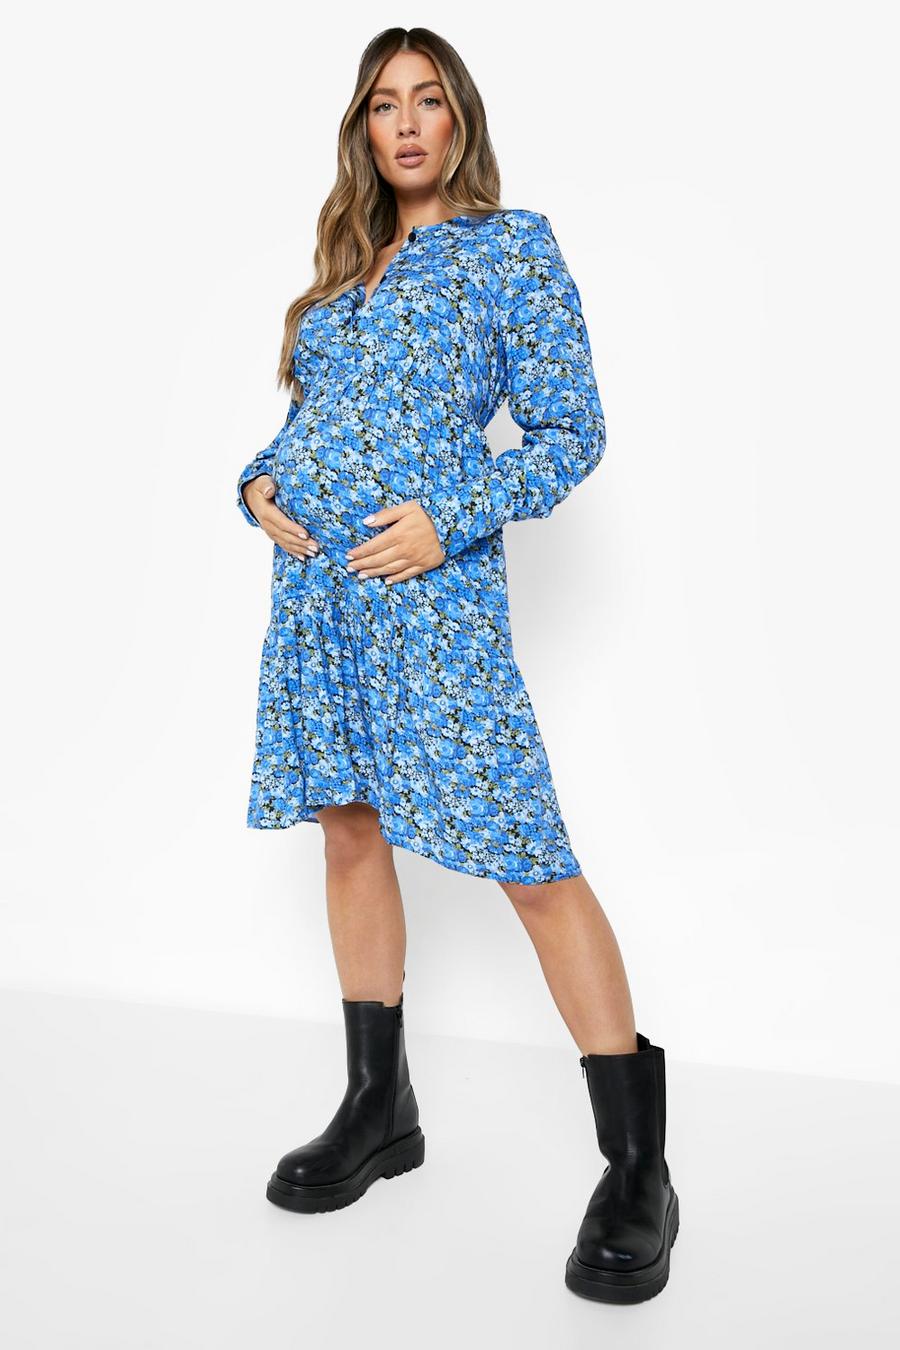 Black Maternity Woven Button Front Floral Smock Dress